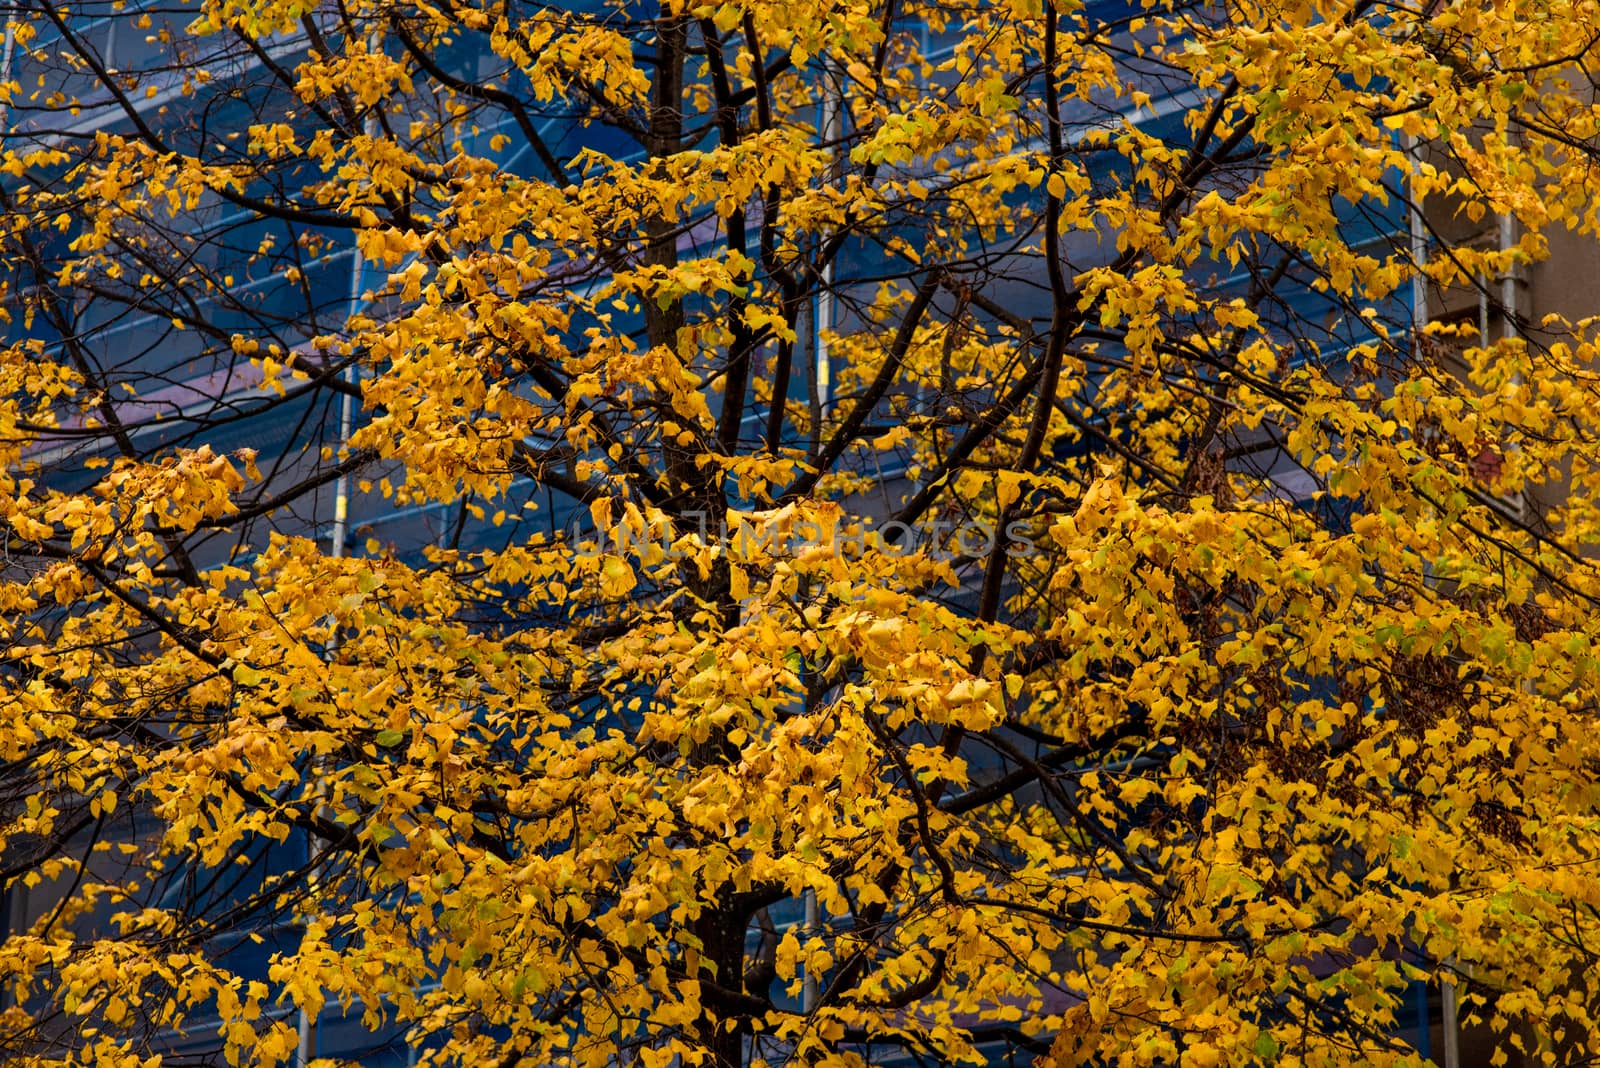 Treetop with yellow leaves in a park during autumn